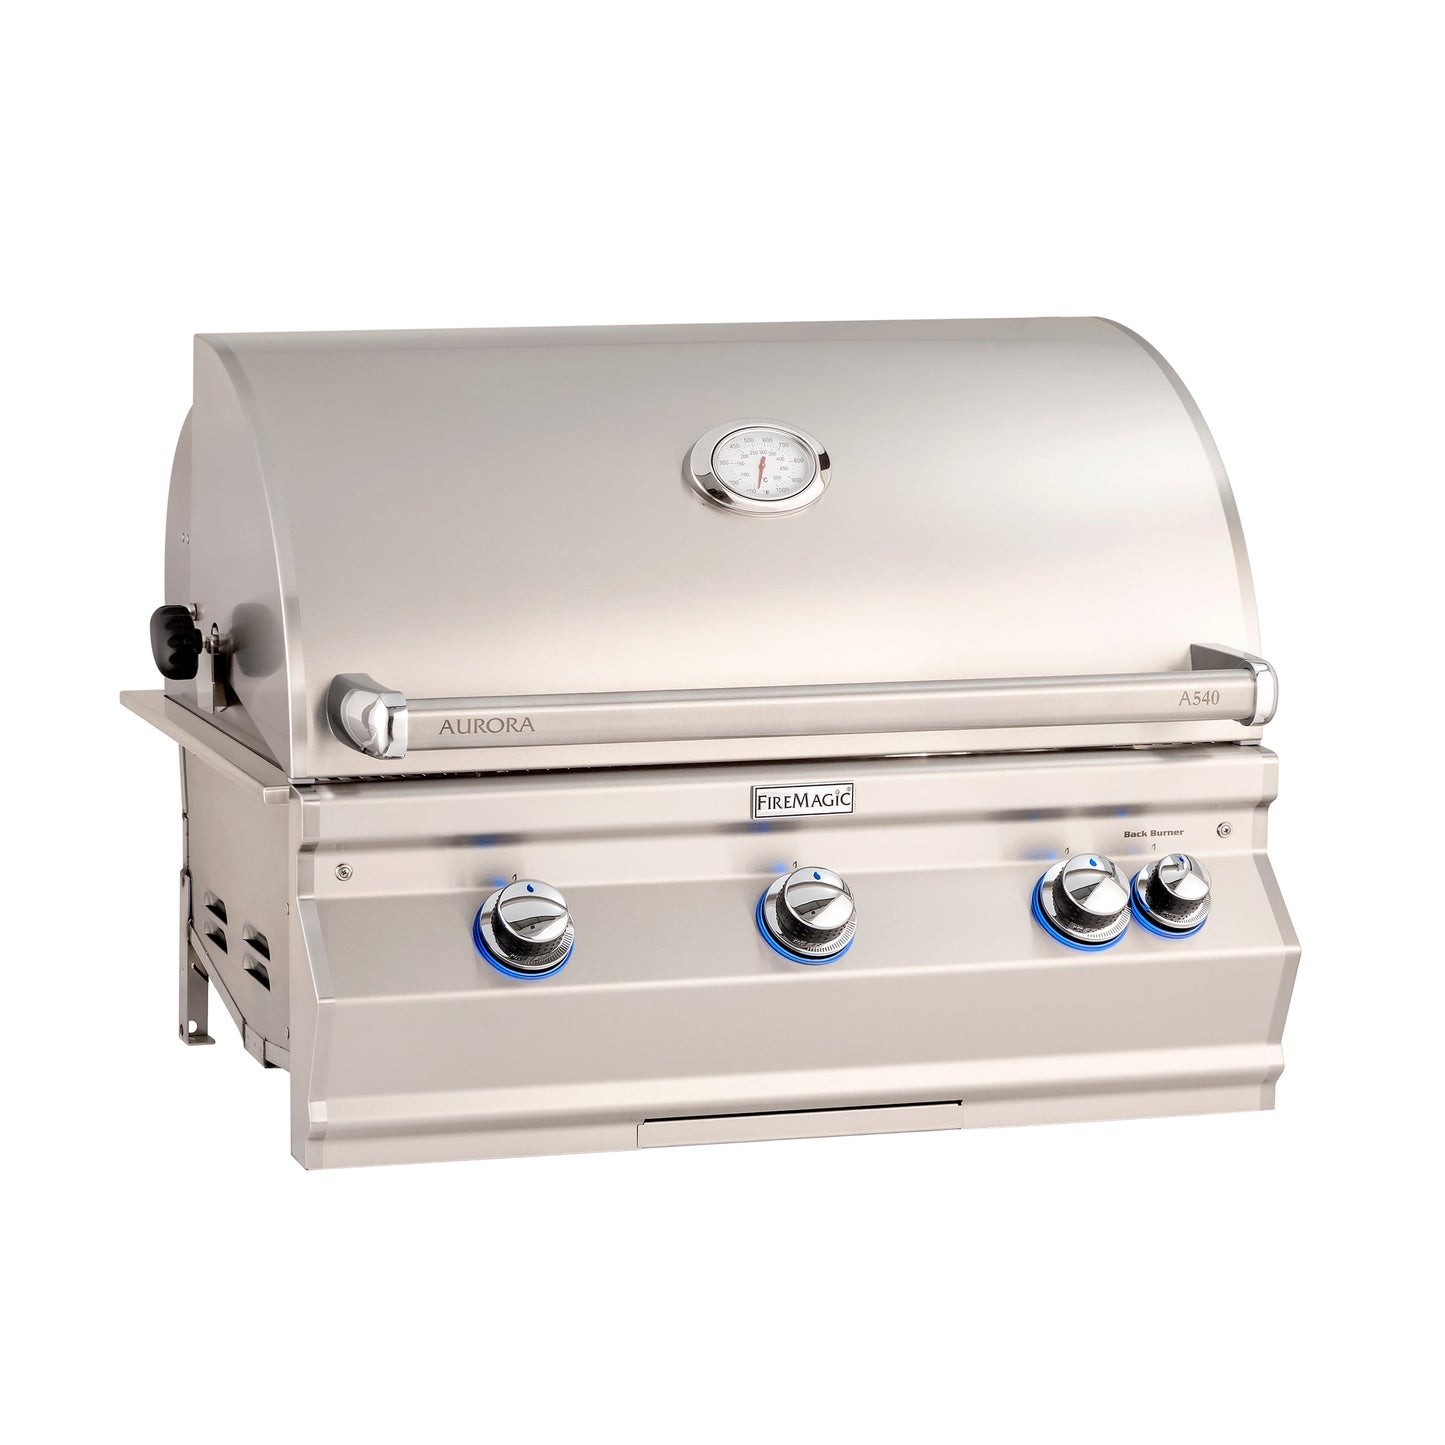 FireMagic Aurora A540i Built-In 30 in. Grill with Analog Thermometer and Rotisserie Backburner